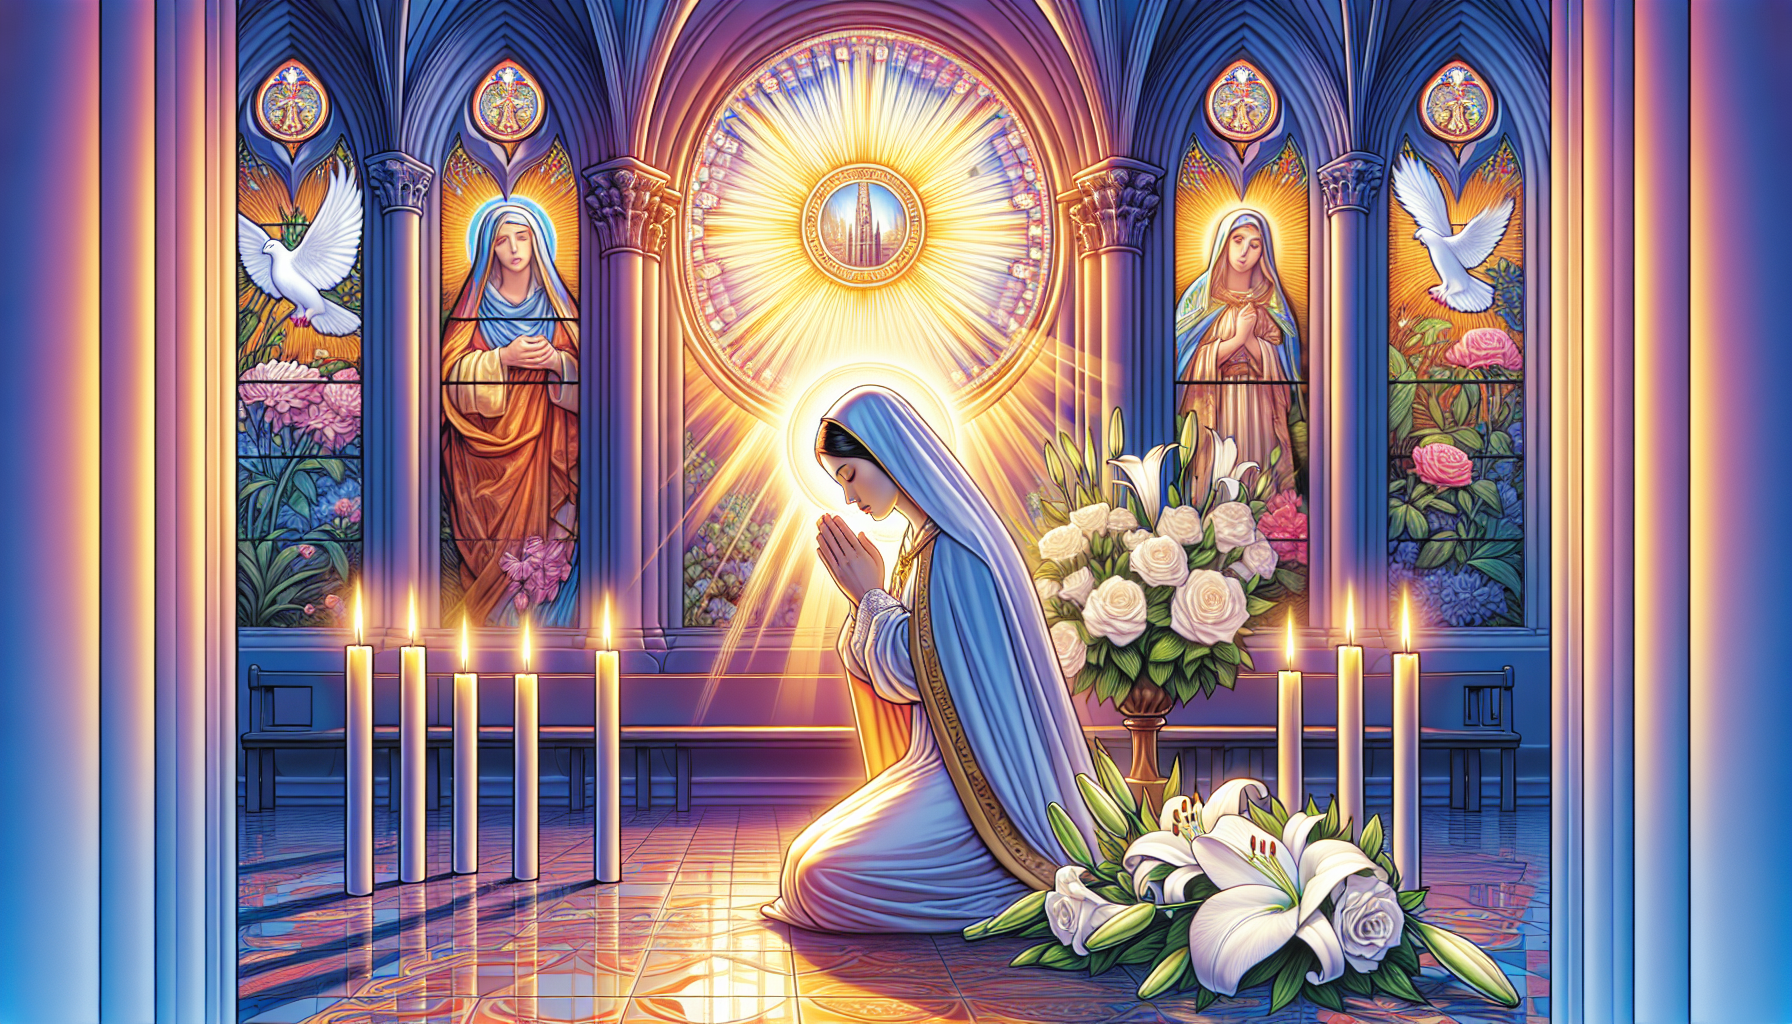 Create an image of a serene and sacred scene featuring Santa Clara, the patron saint of clarity and light. She is depicted kneeling in prayer inside a beautiful, historical church with sunlight stream